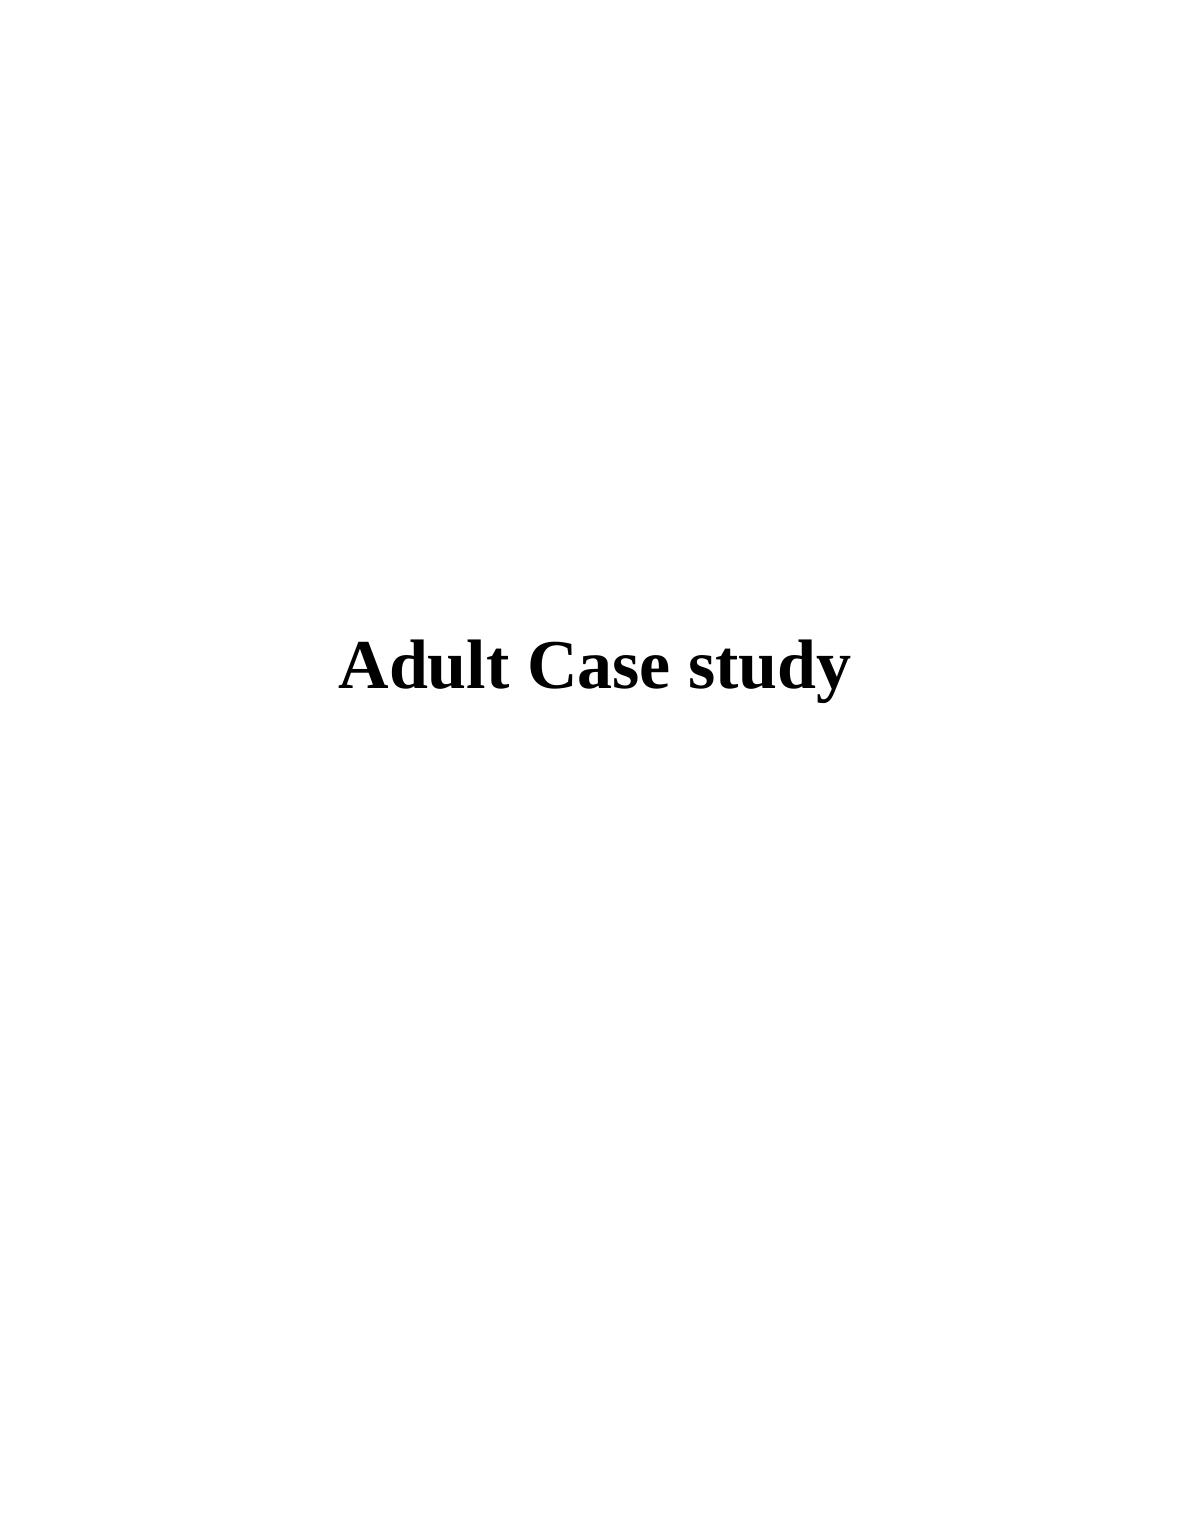 Case study on Adult Assignment_1